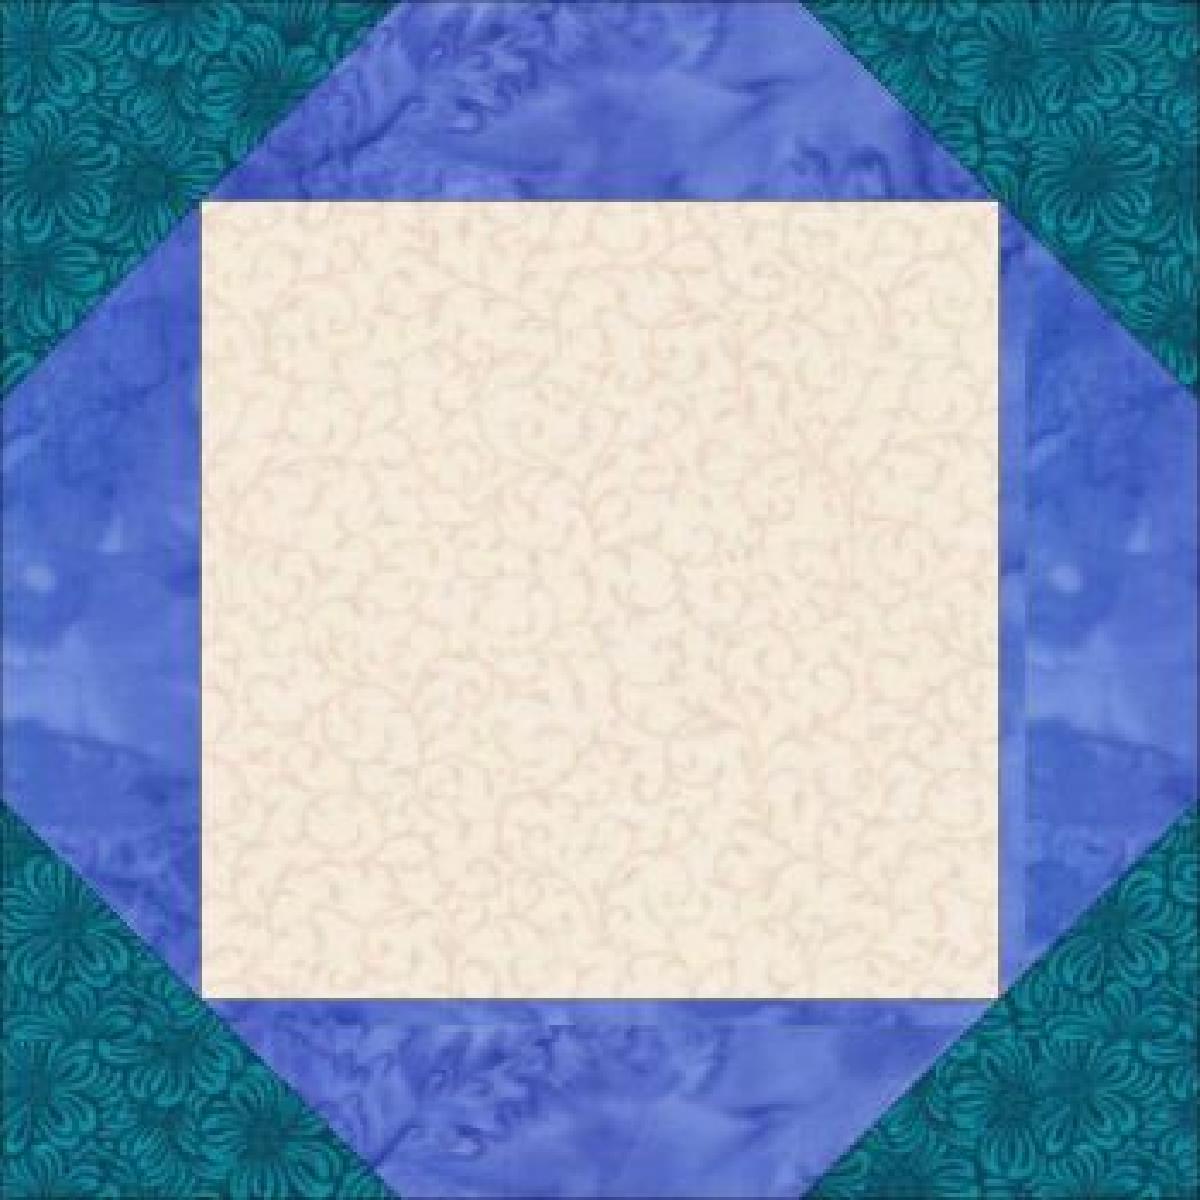 Variation on a Square4